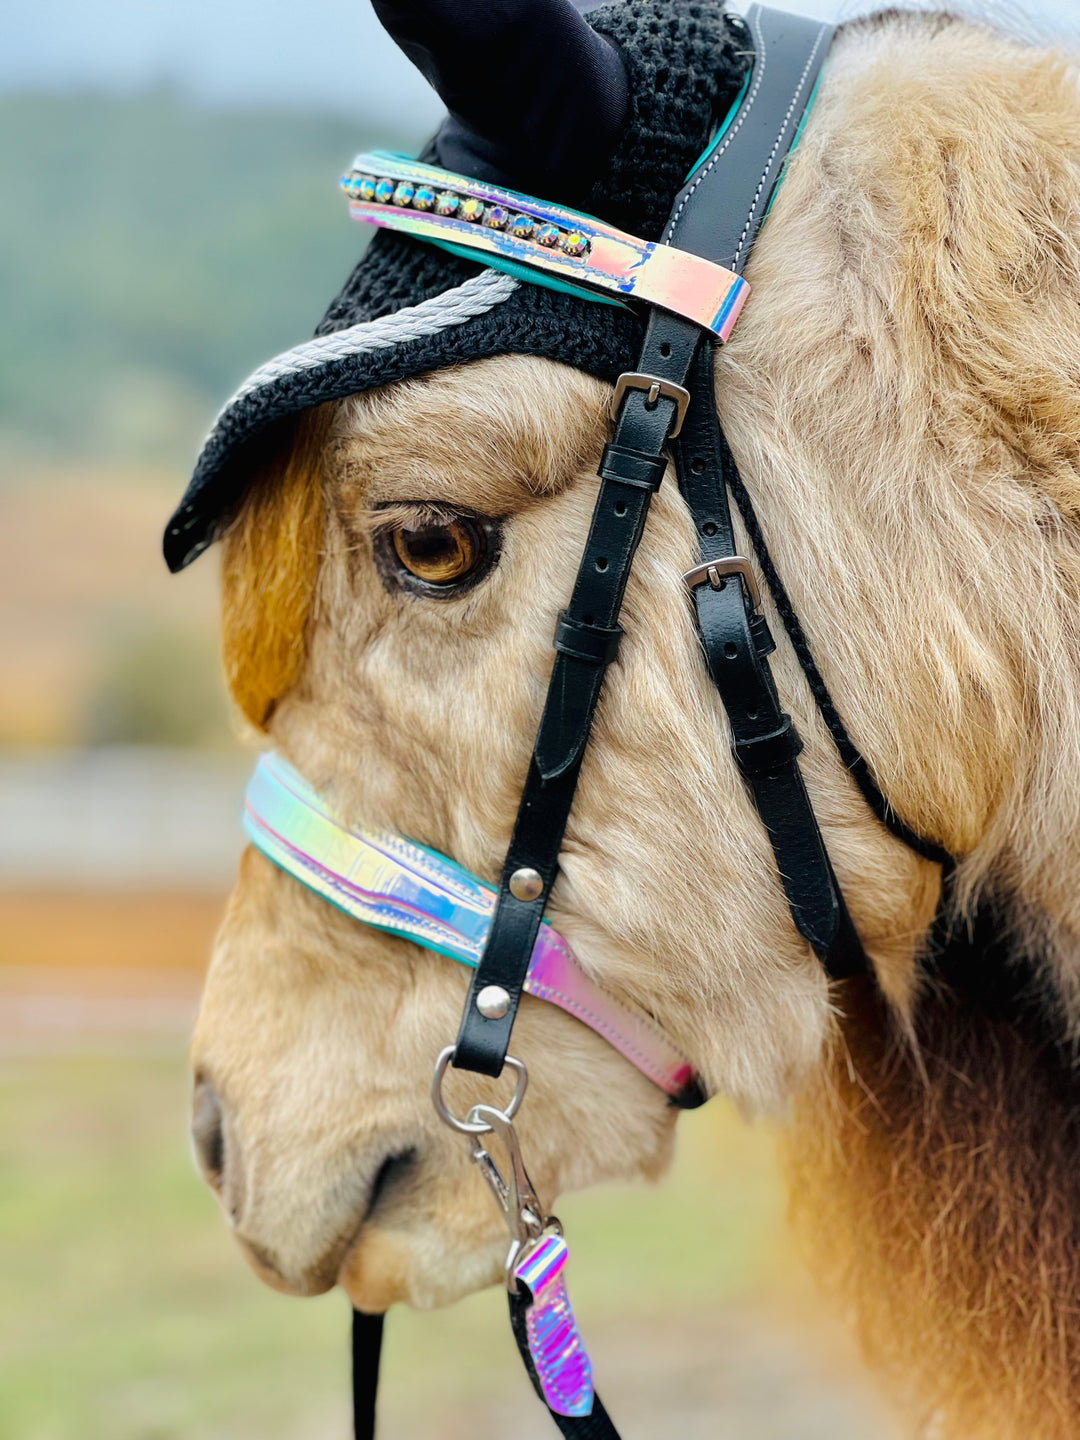 Holographic Leather Horse Halter - Mini to Horse Size